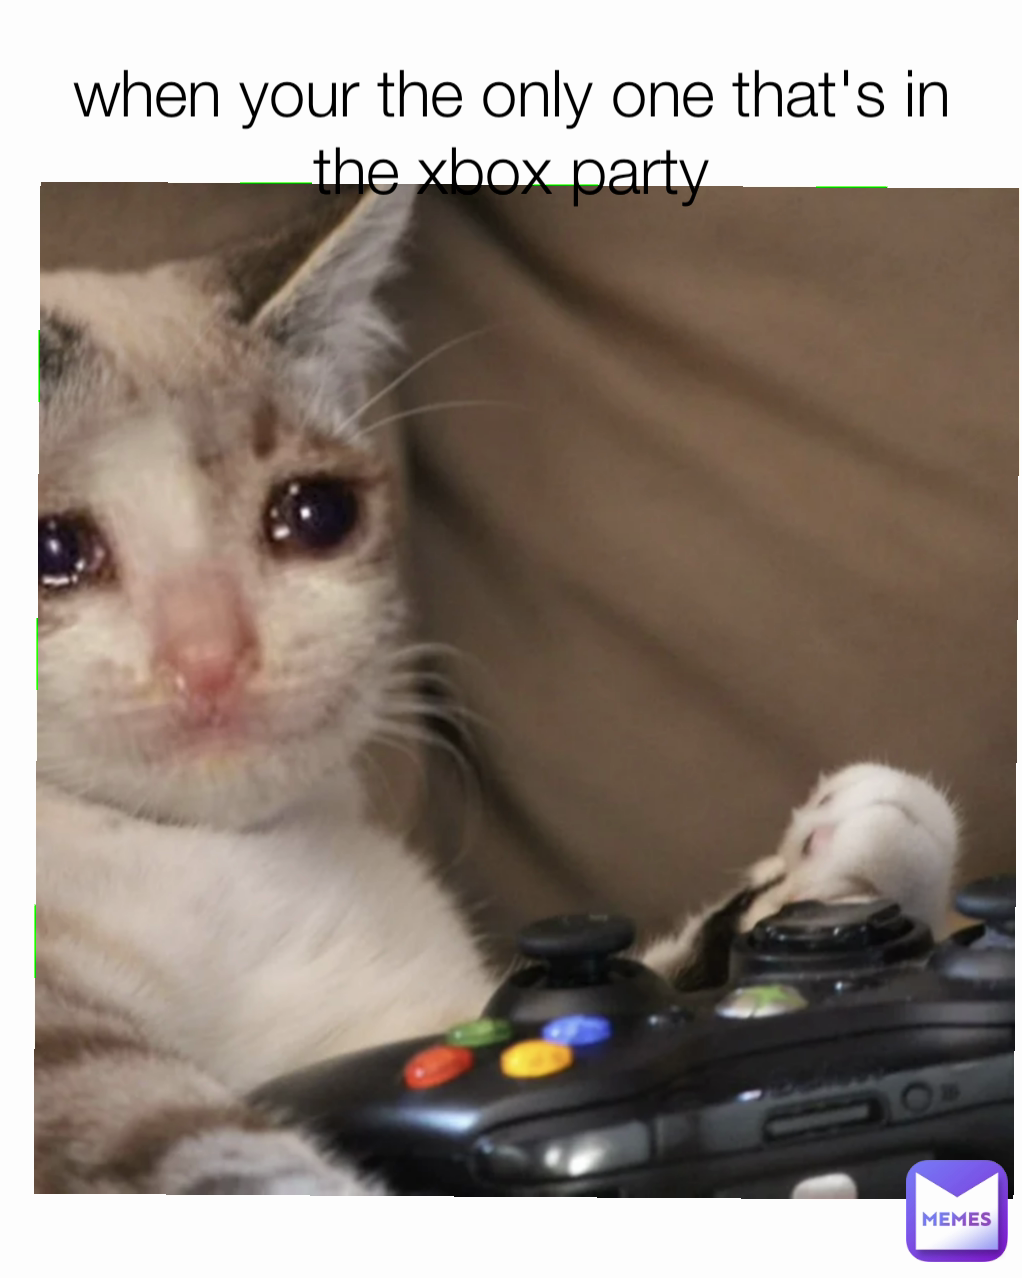 when your the only one that's in the xbox party